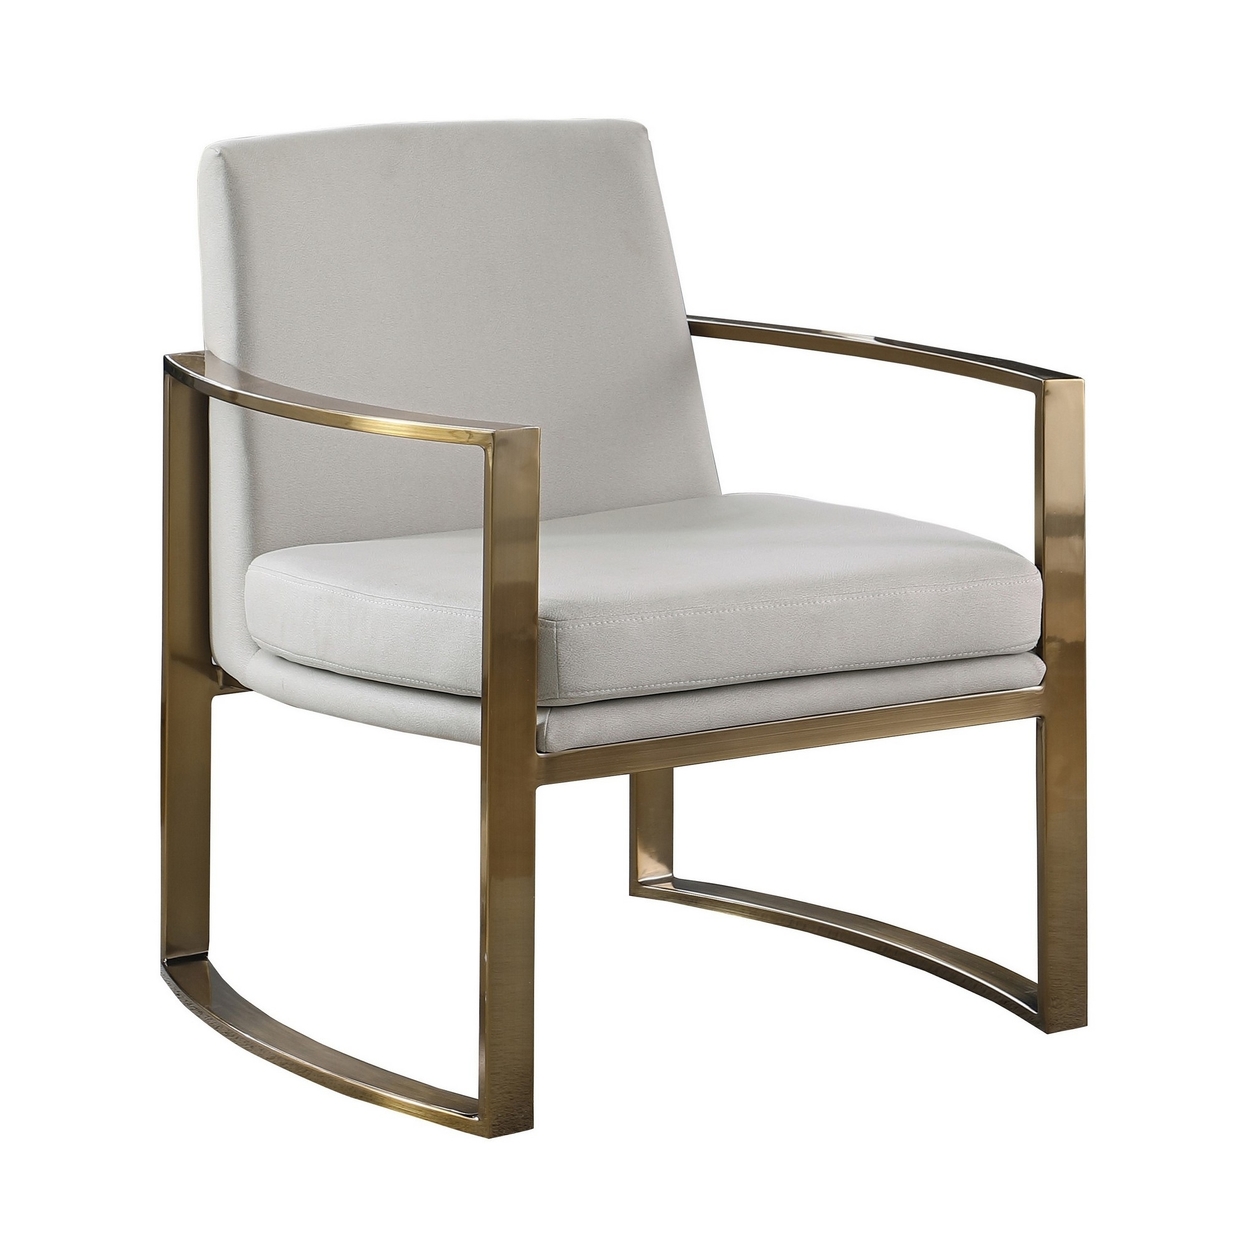 29 Inch Modern Accent Armchair, Bronze Arms And Base, Cream Faux Leather- Saltoro Sherpi